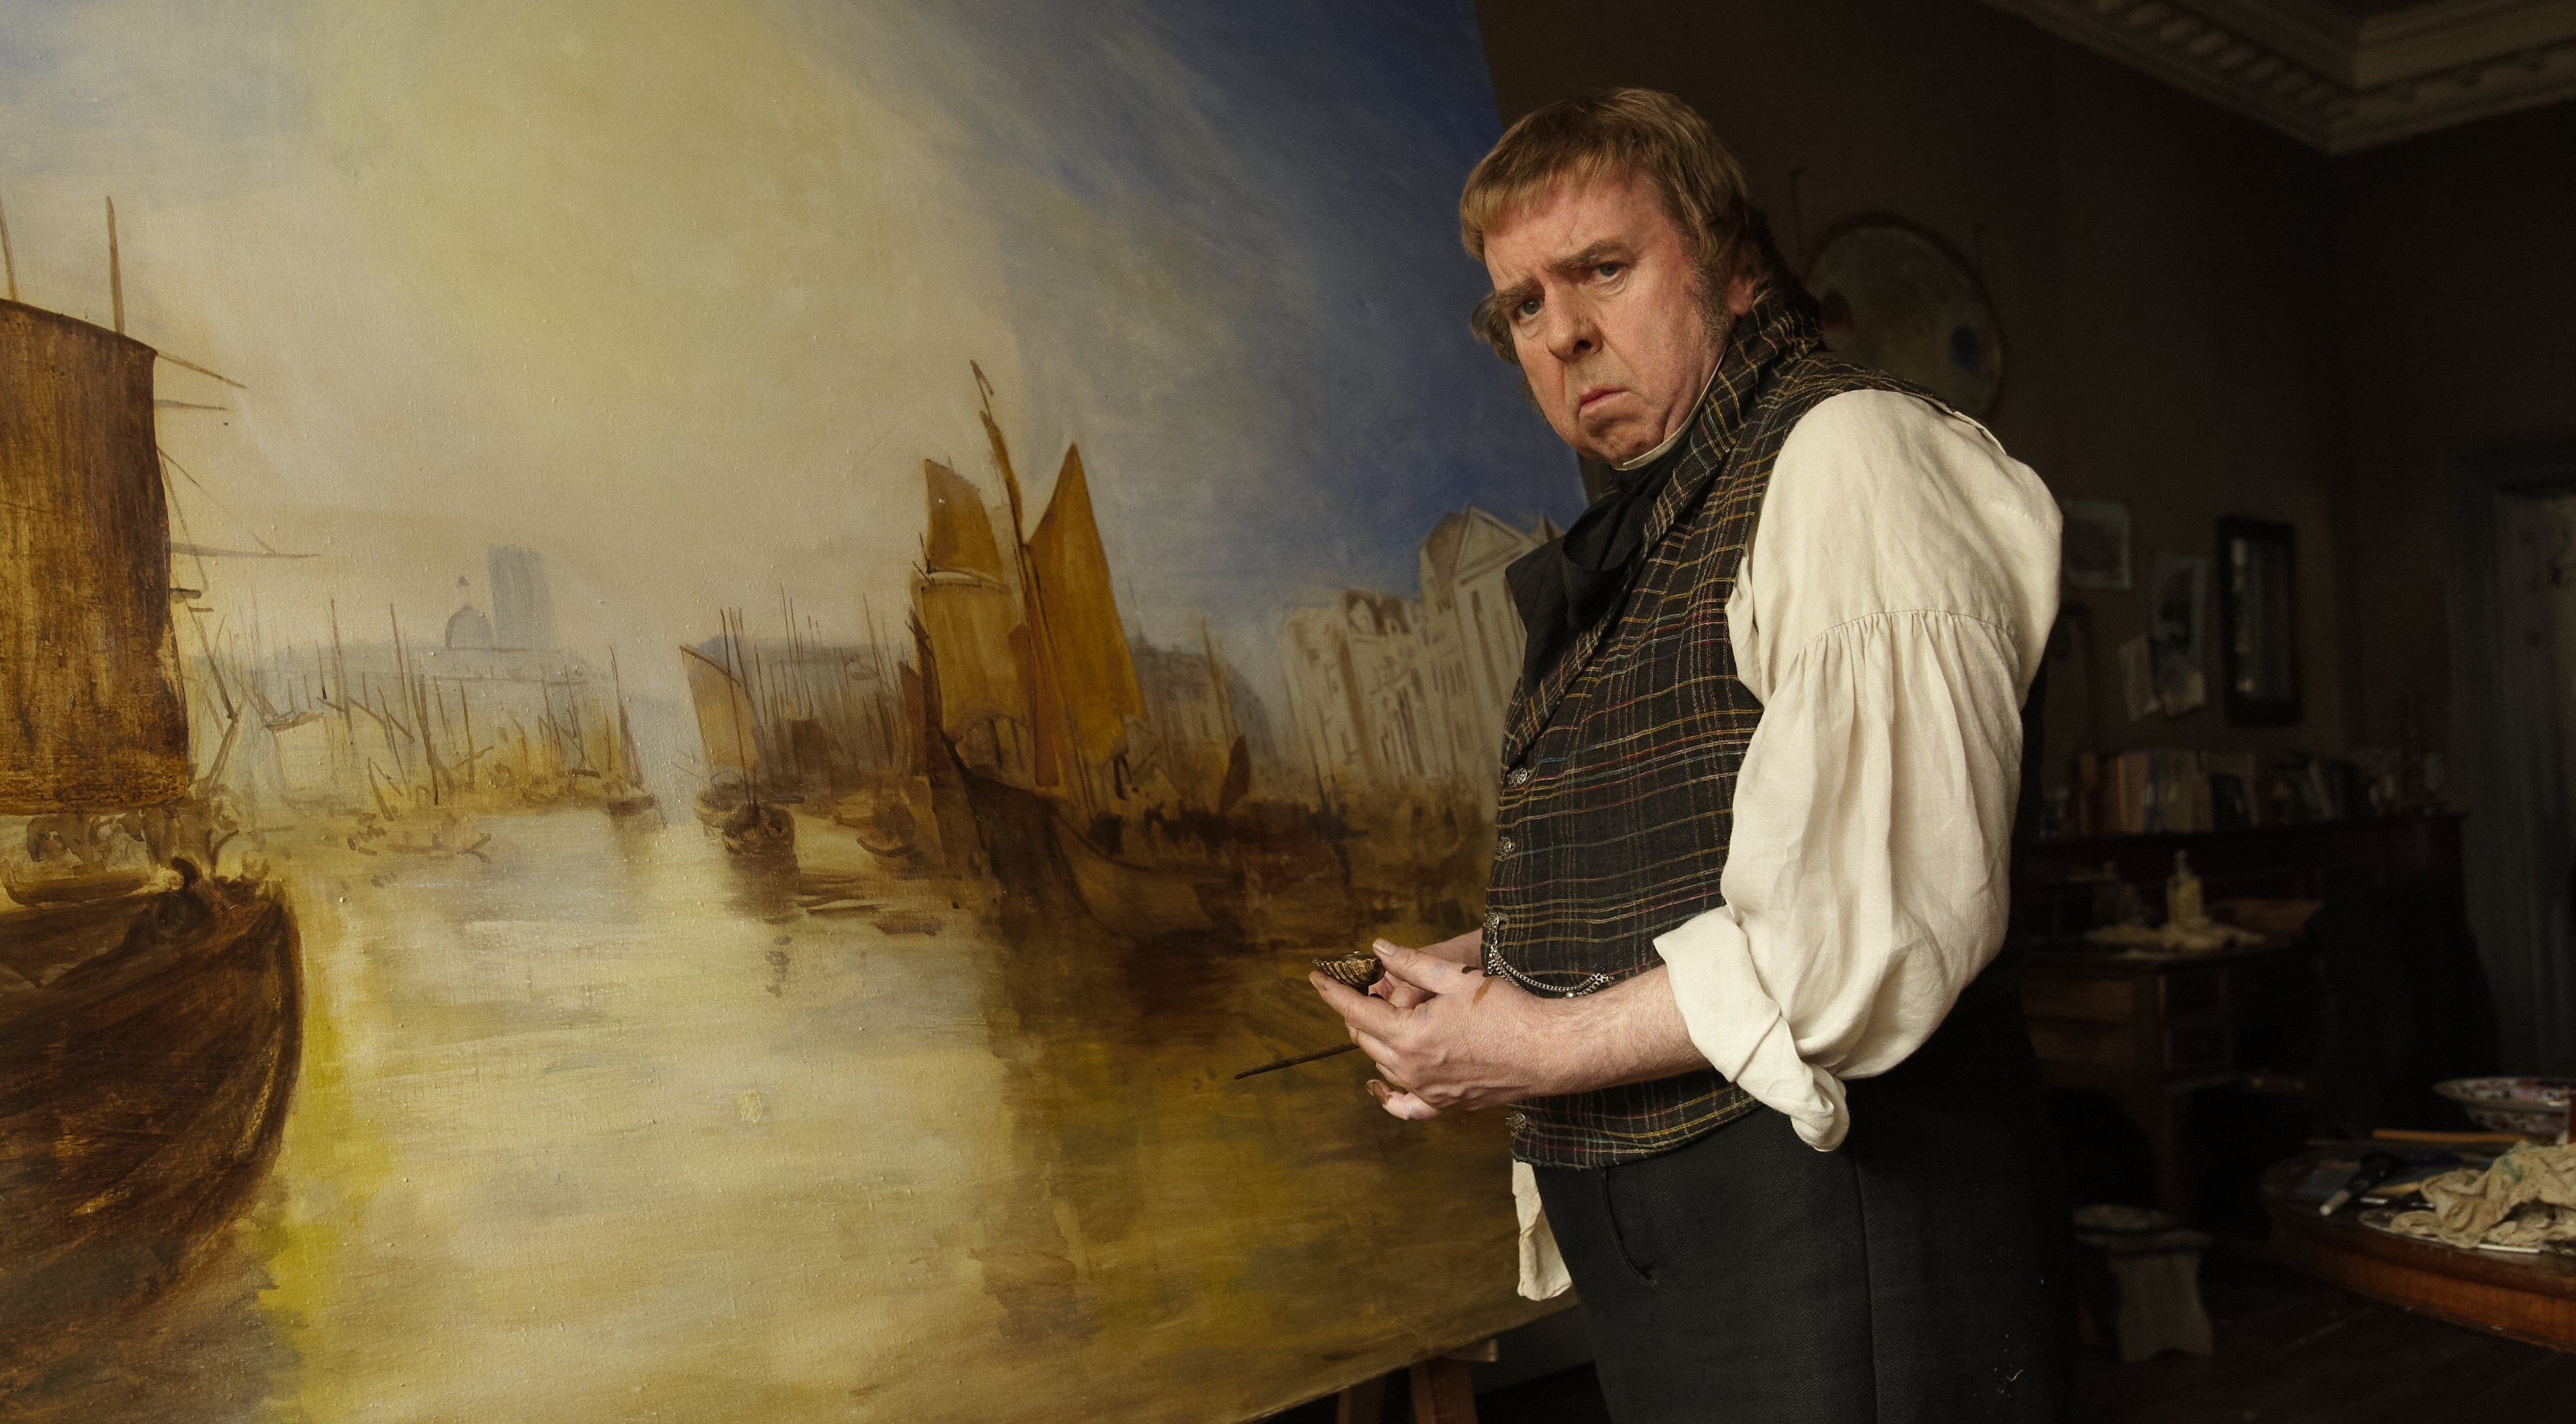 Timothy Spall won Best Actor at Cannes for his performance as J.M.W. Turner.